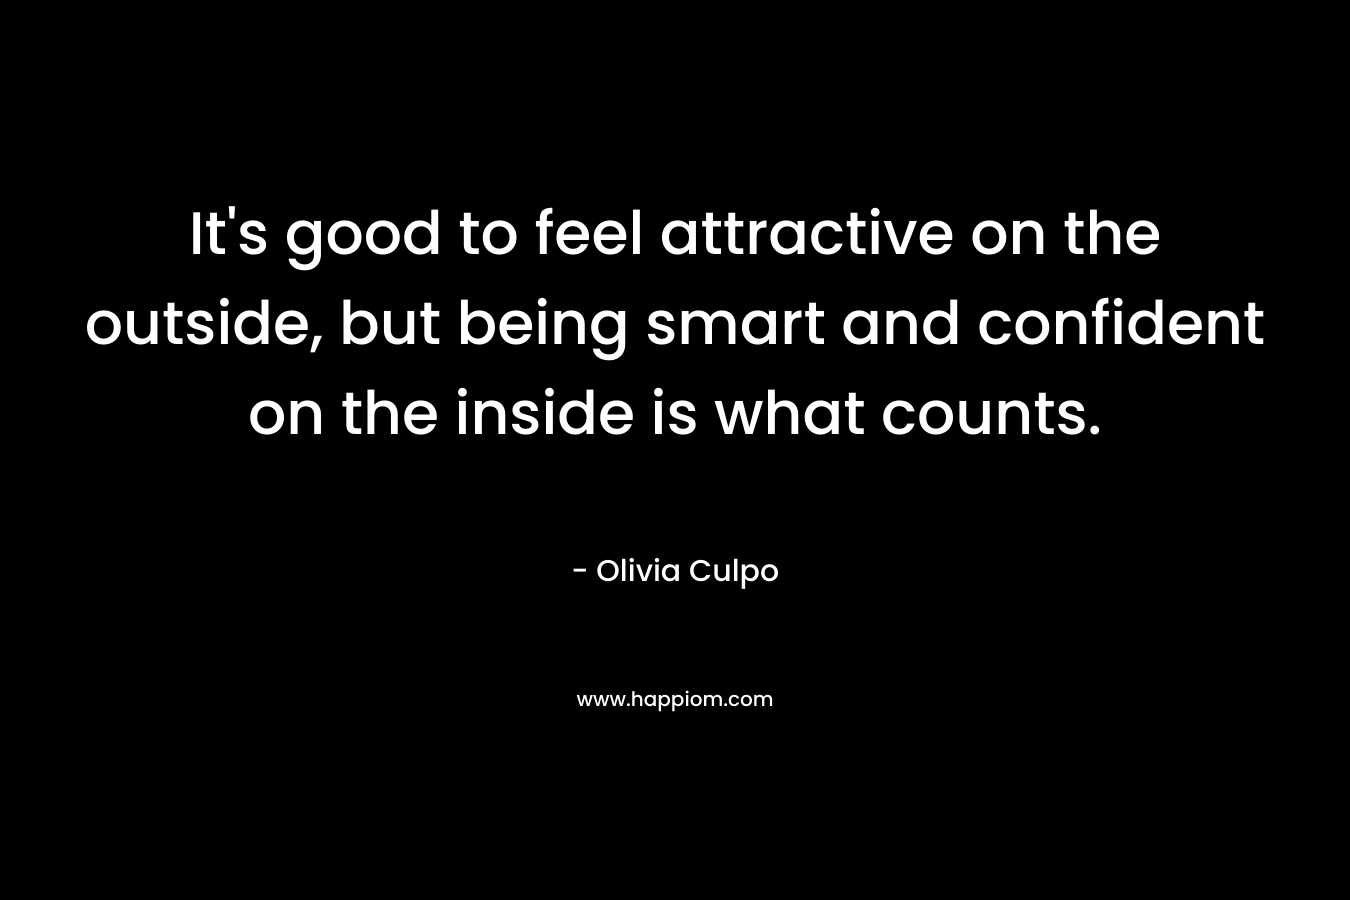 It’s good to feel attractive on the outside, but being smart and confident on the inside is what counts. – Olivia Culpo